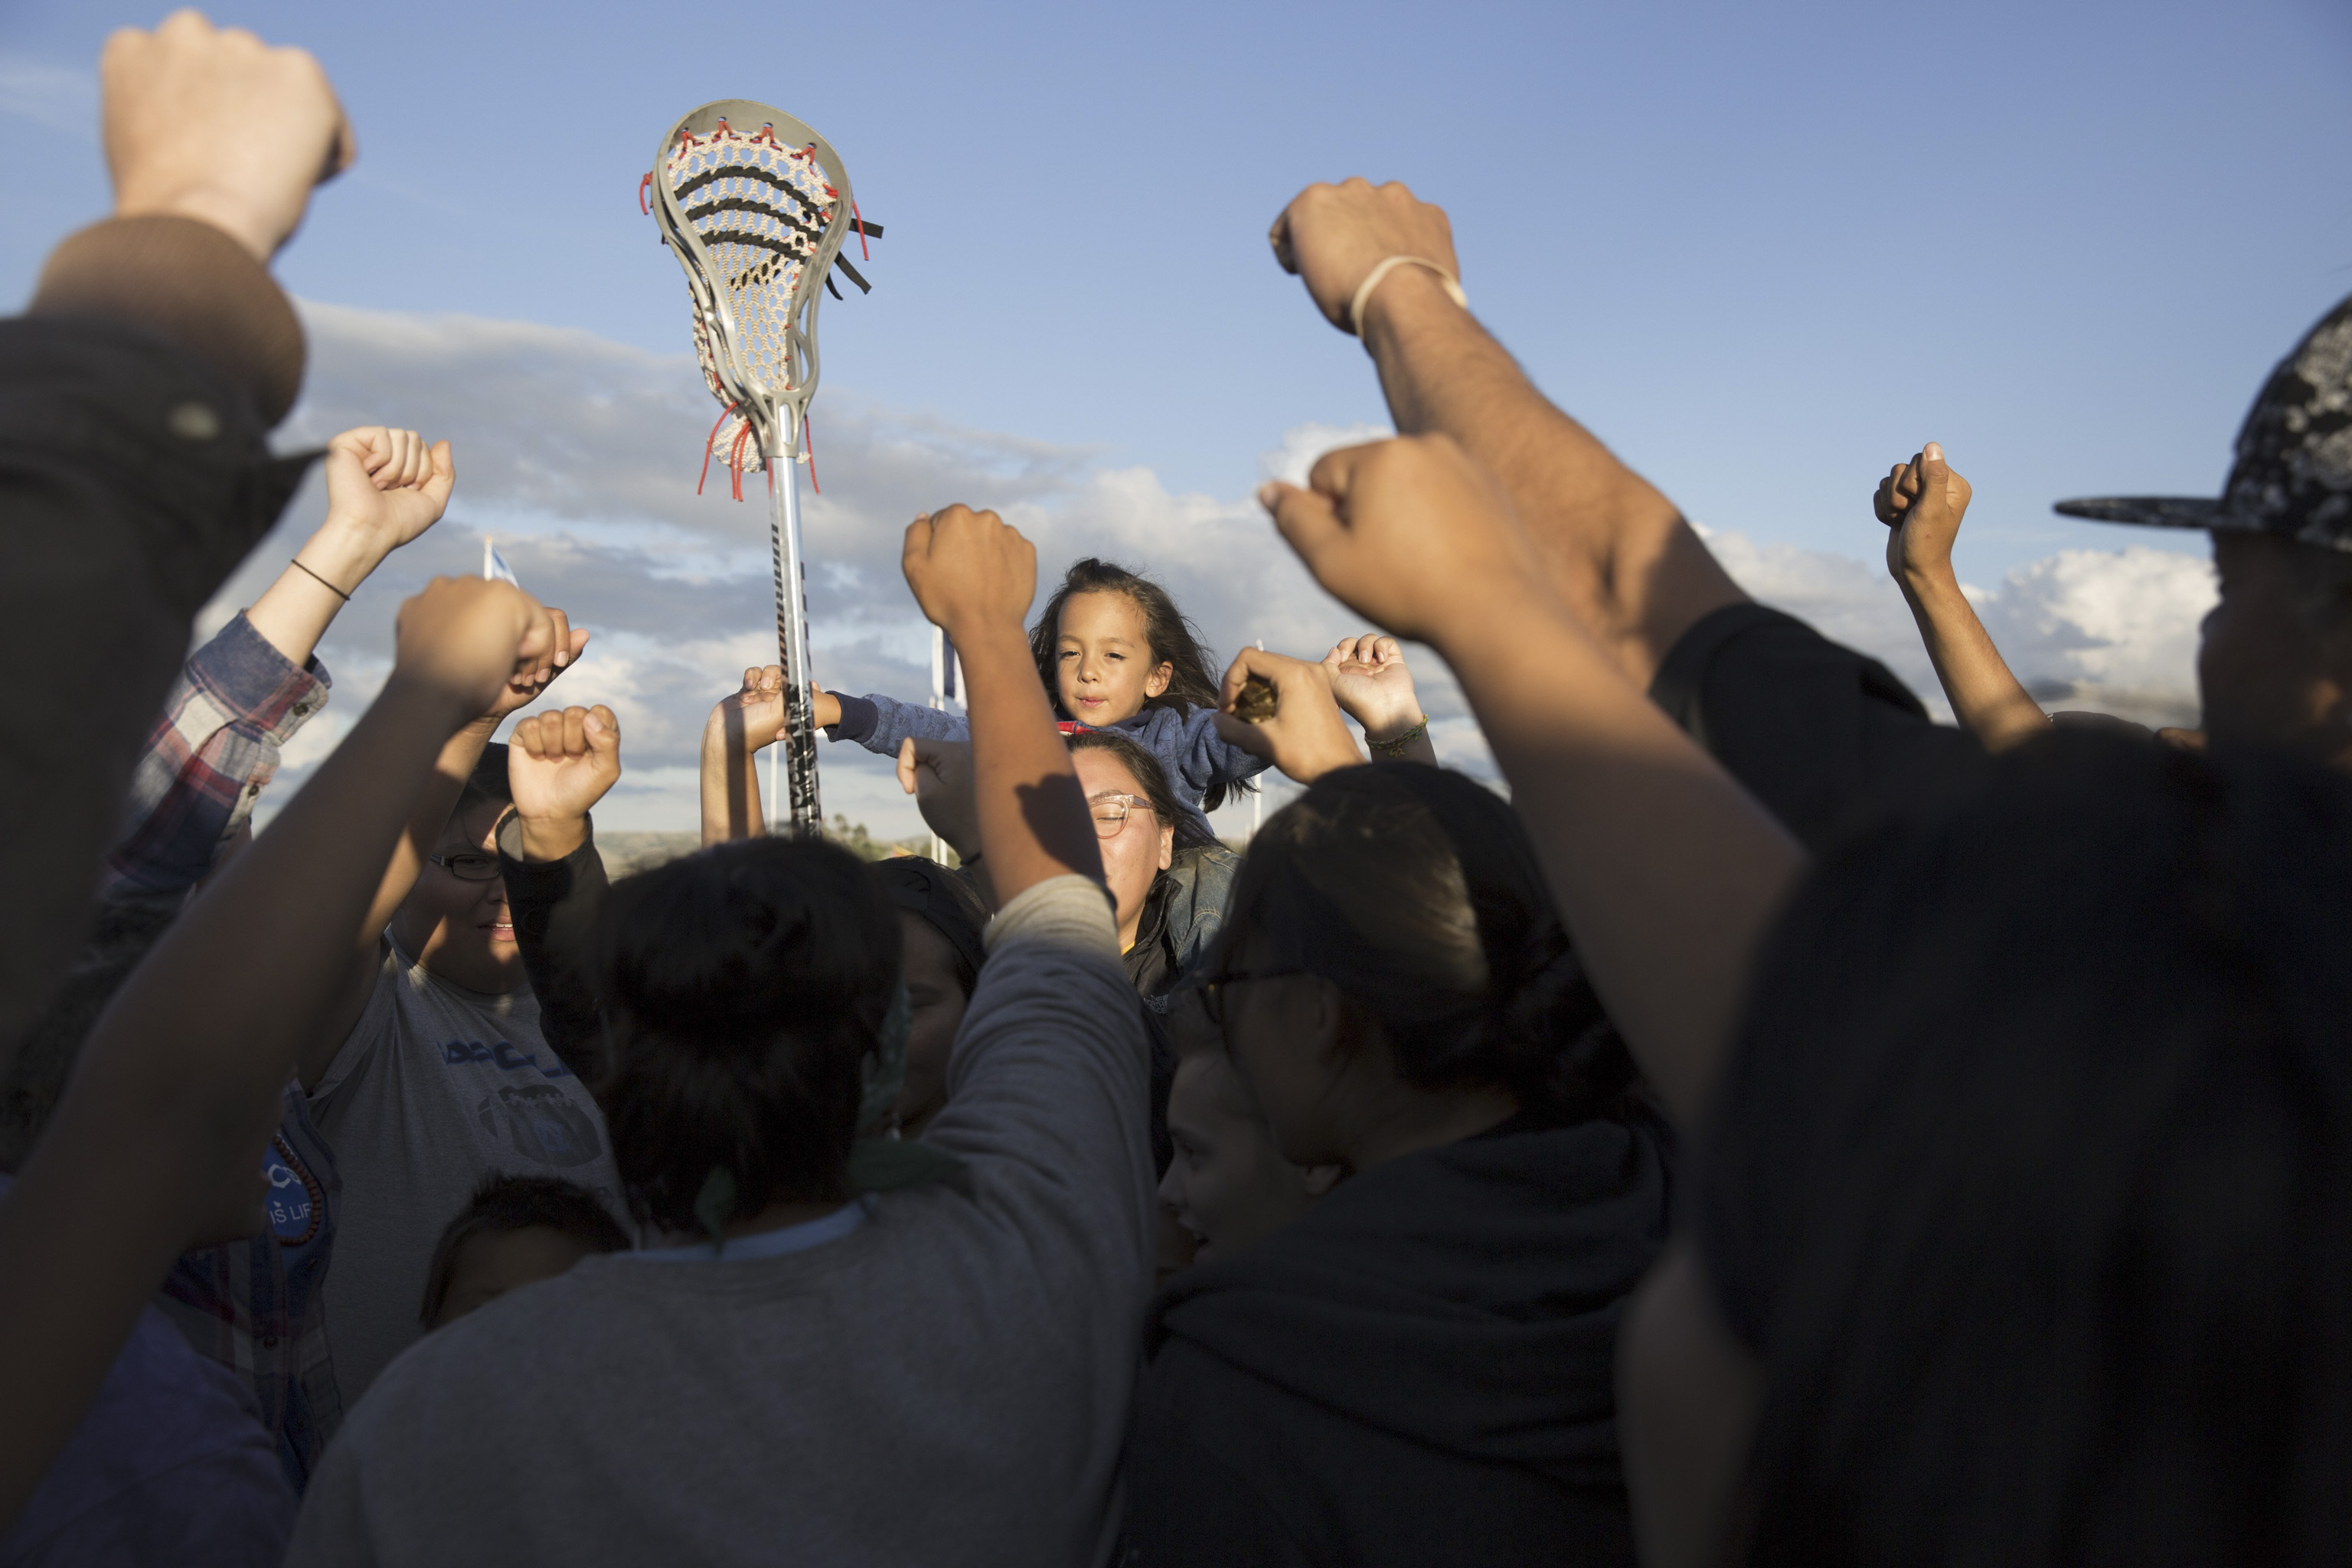 The Youth Camp Council march and chant in opposition to the pipeline construction at the Sacred Stone Camp, in North Dakota, on Sept. 8, 2016.